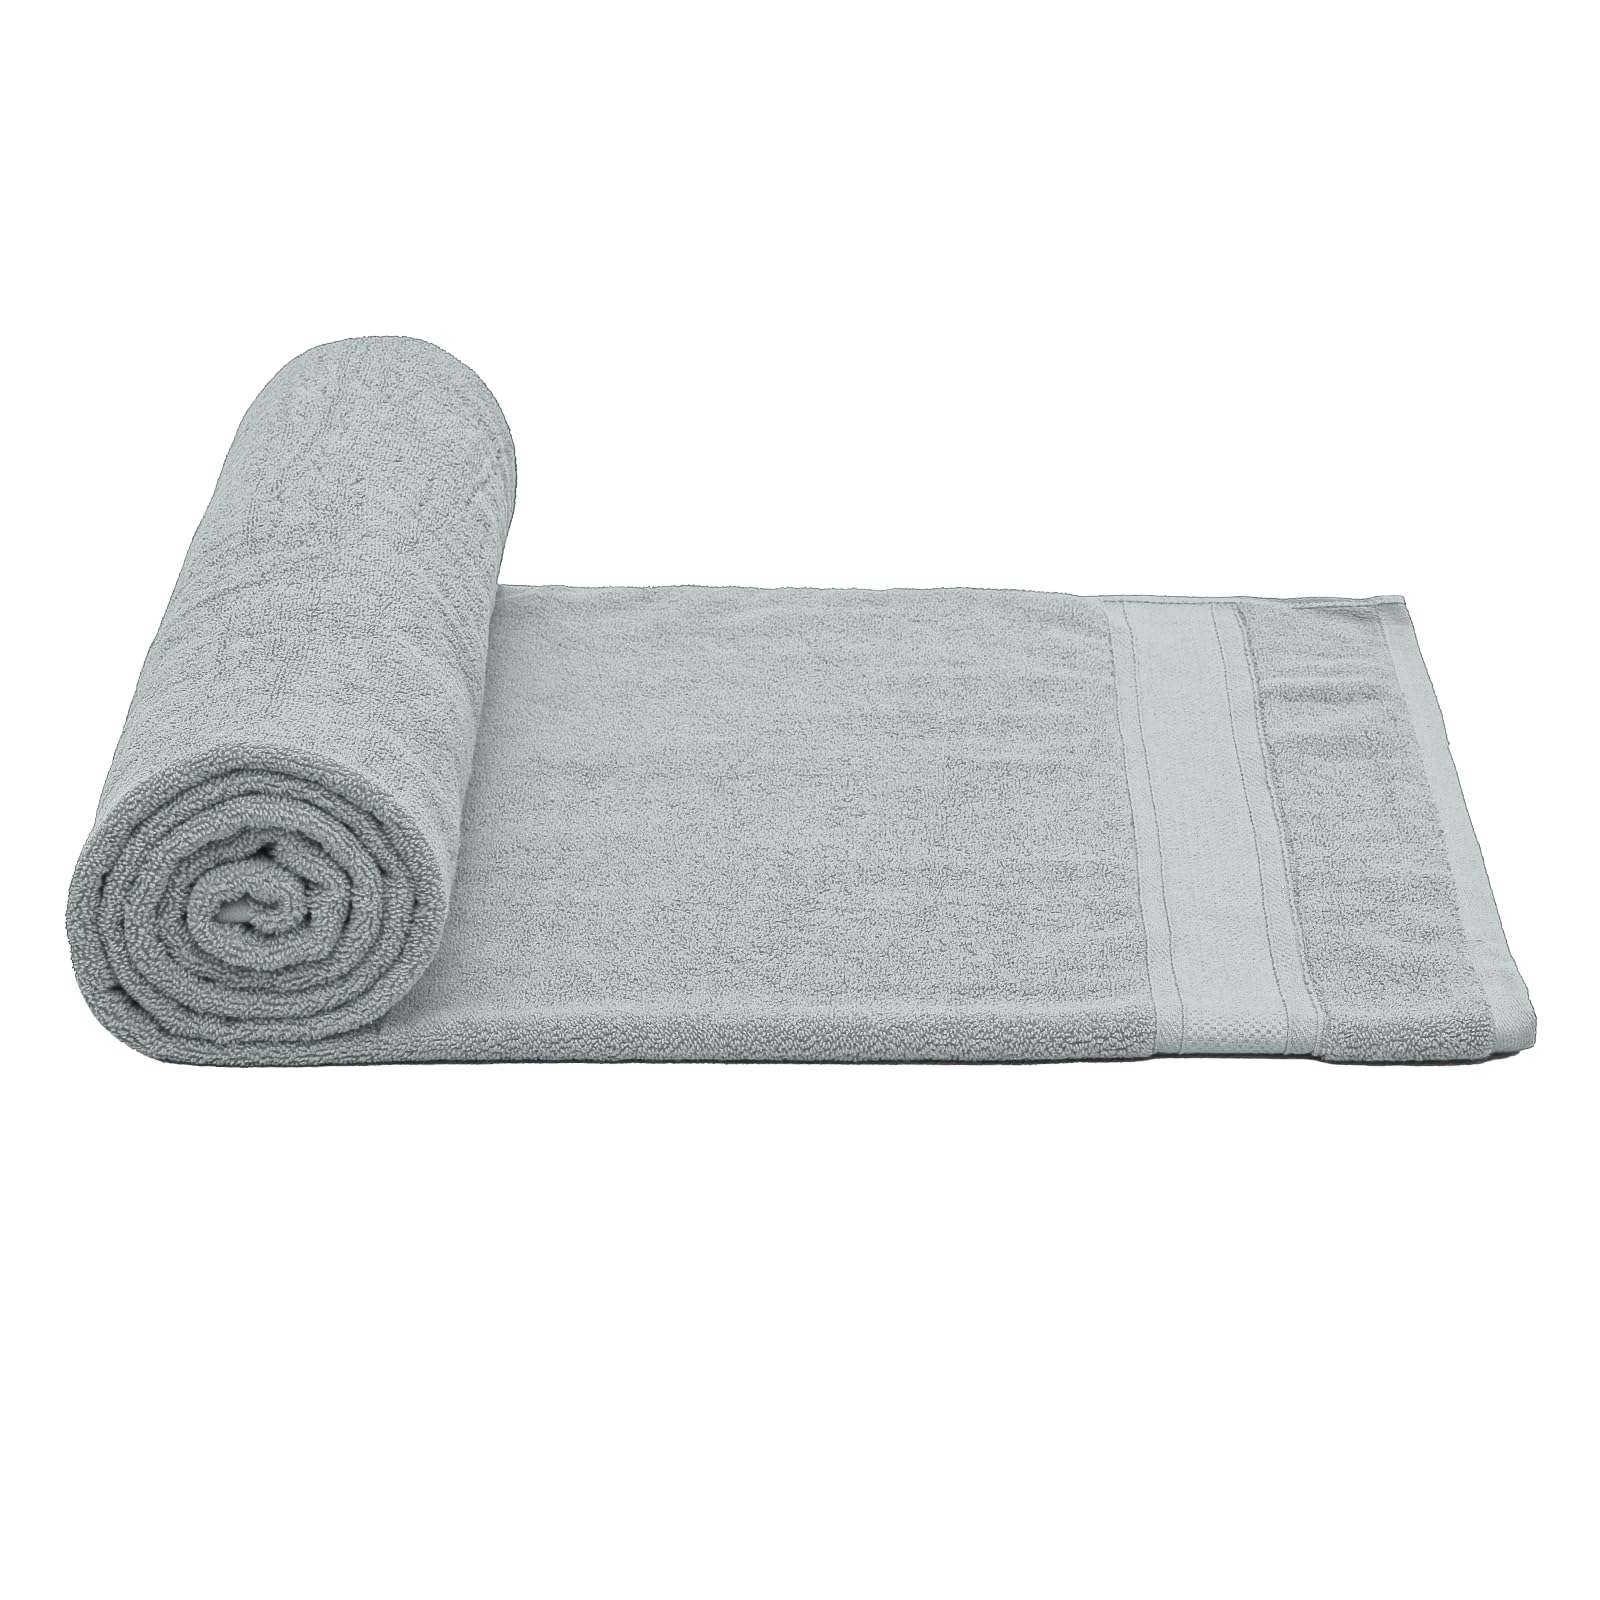 Magshion Extra Large Cotton Bath Sheet for Bathroom Adults Oversized Quick-Dry Bath Sheet Towel, Gray